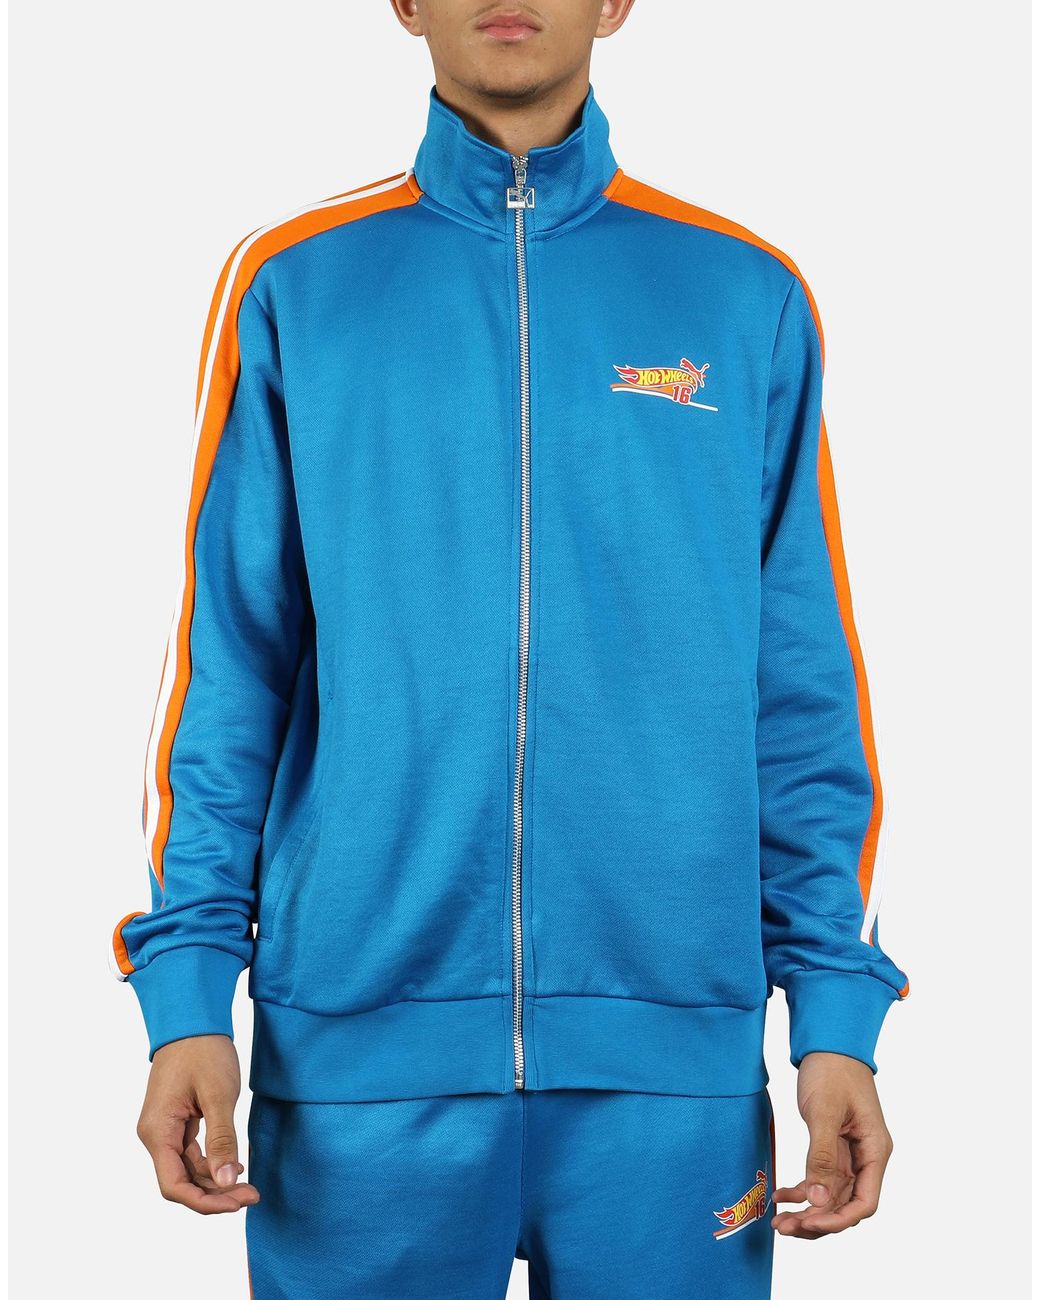 PUMA Synthetic Hot Wheels Track Jacket in Blue for Men - Lyst